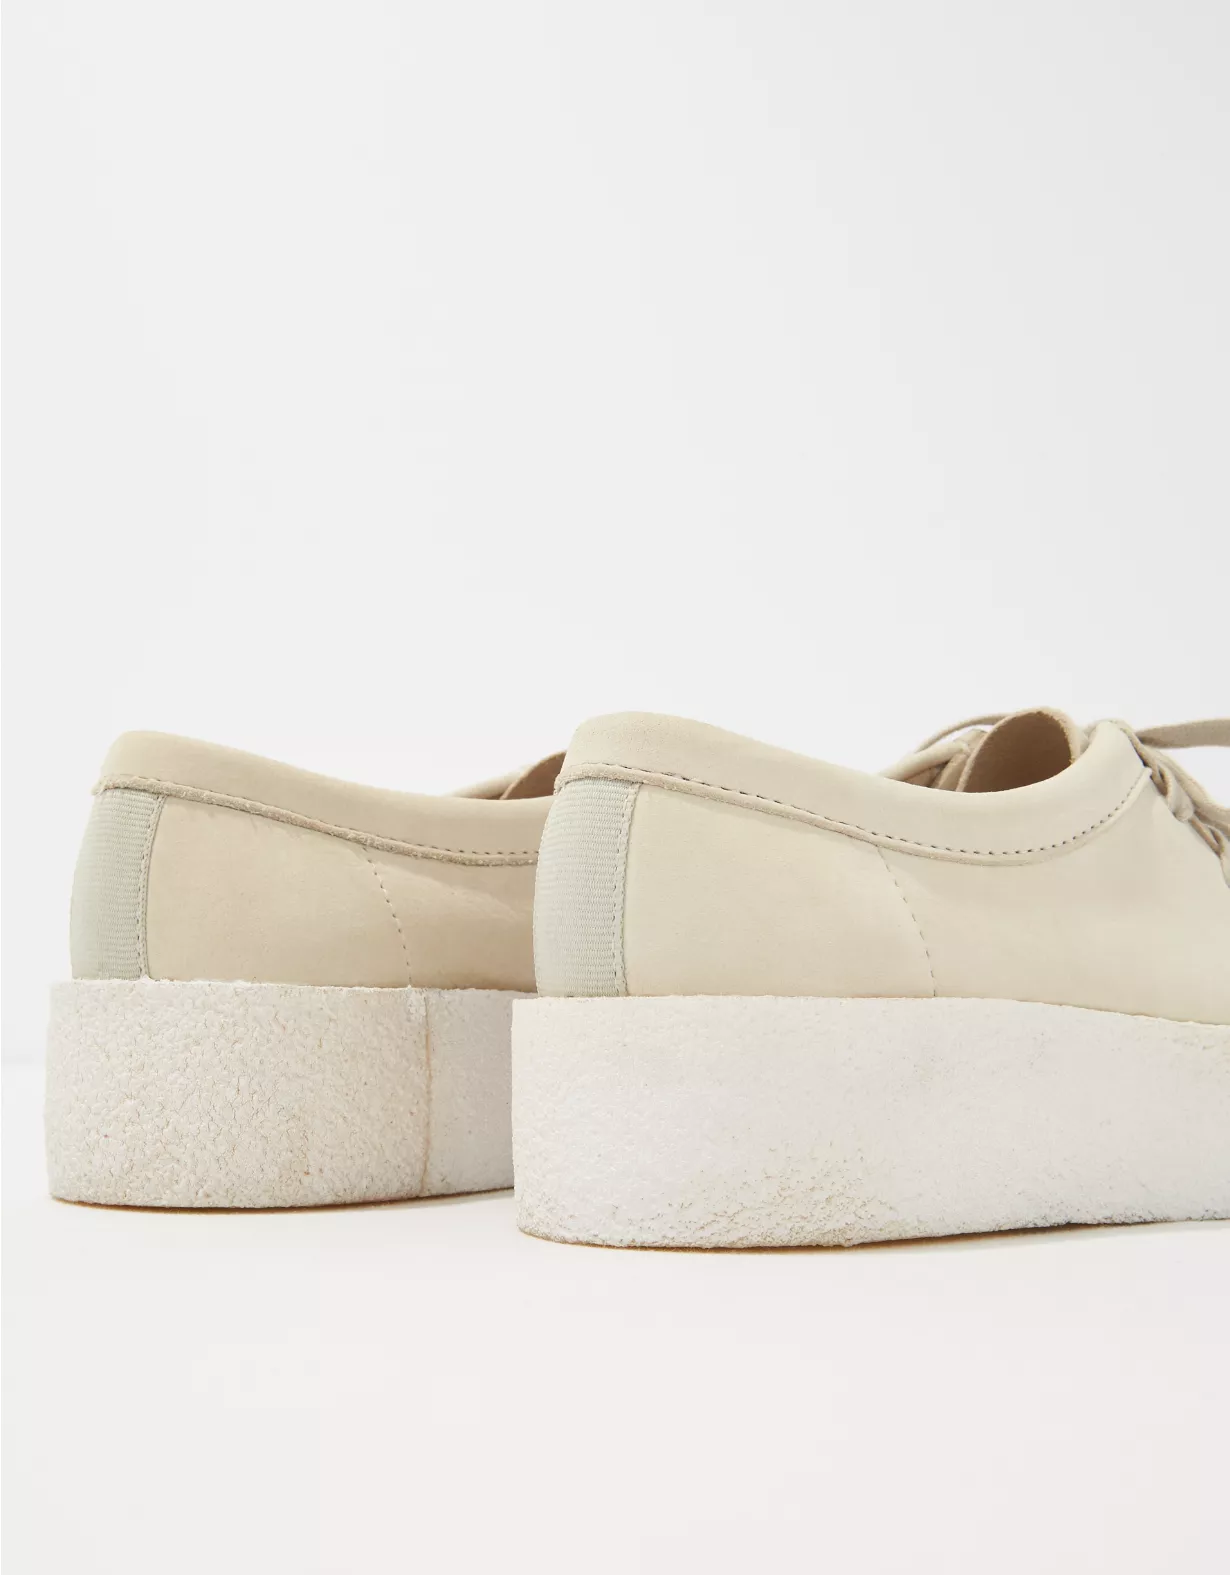 Clarks Women's Wallabee Cup Moccasin